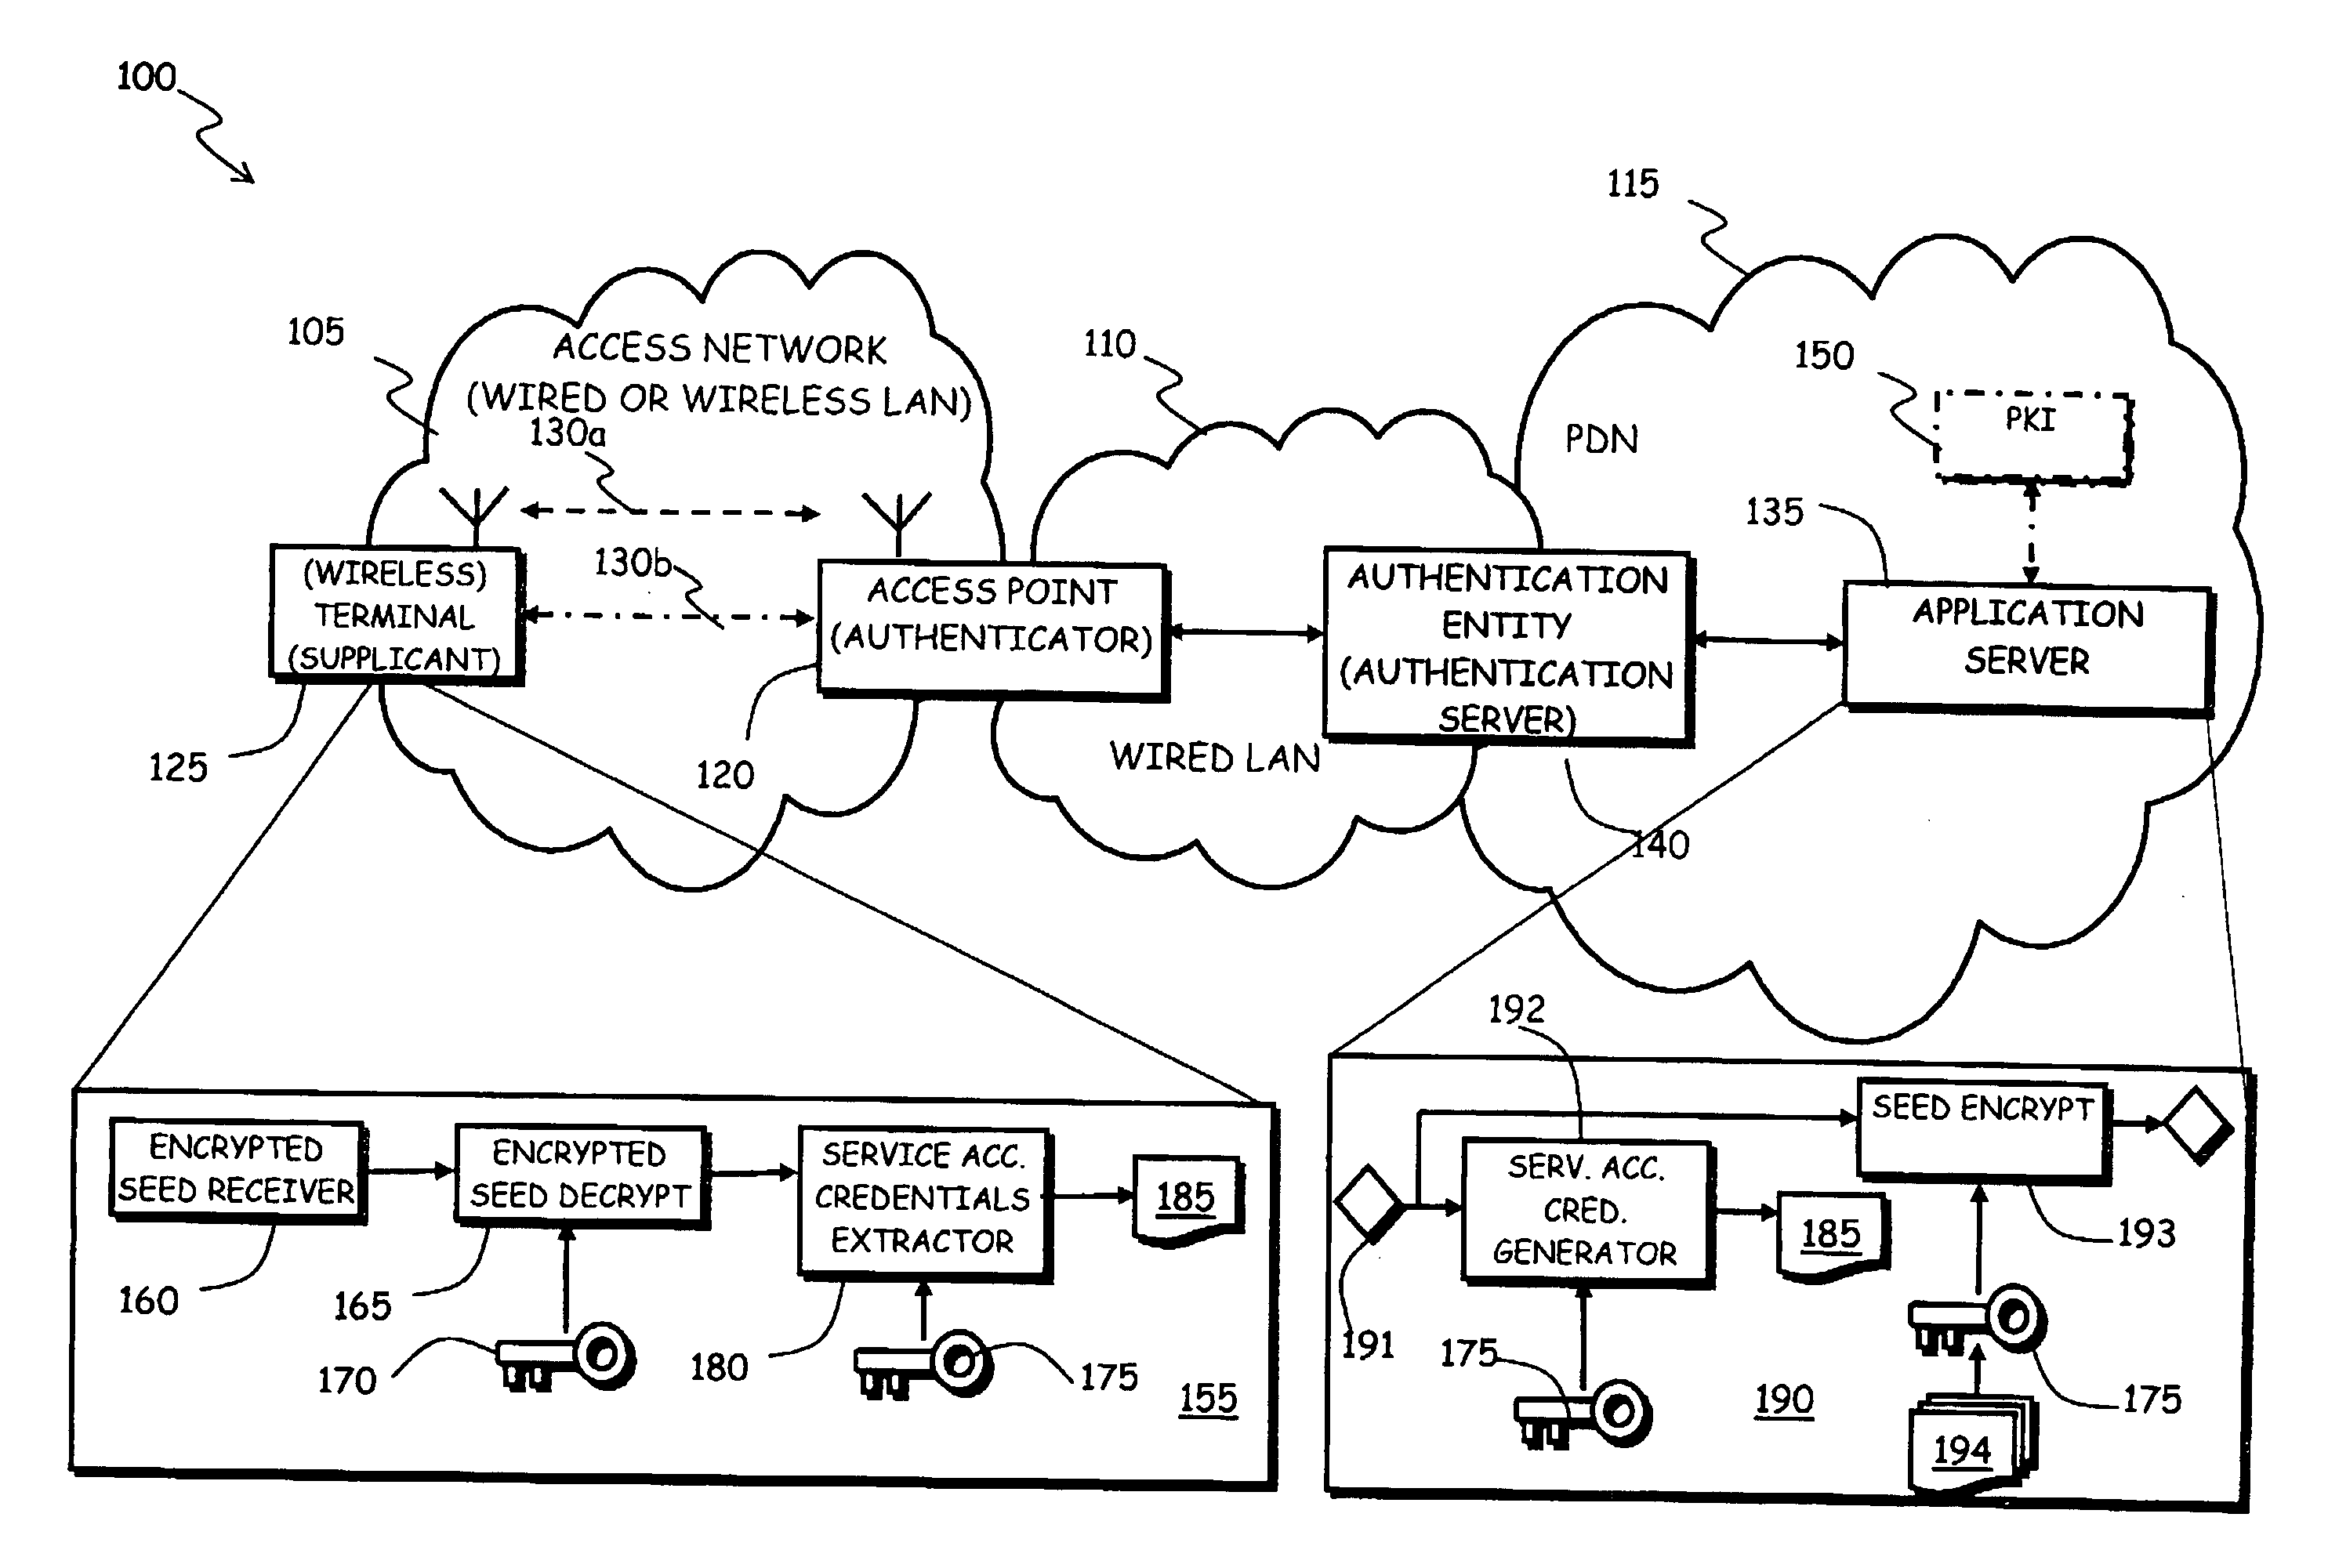 Method and System for Automated and Secure Provisioning of Service Access Credentials for On-Line Services to Users of Mobile Communication Terminals